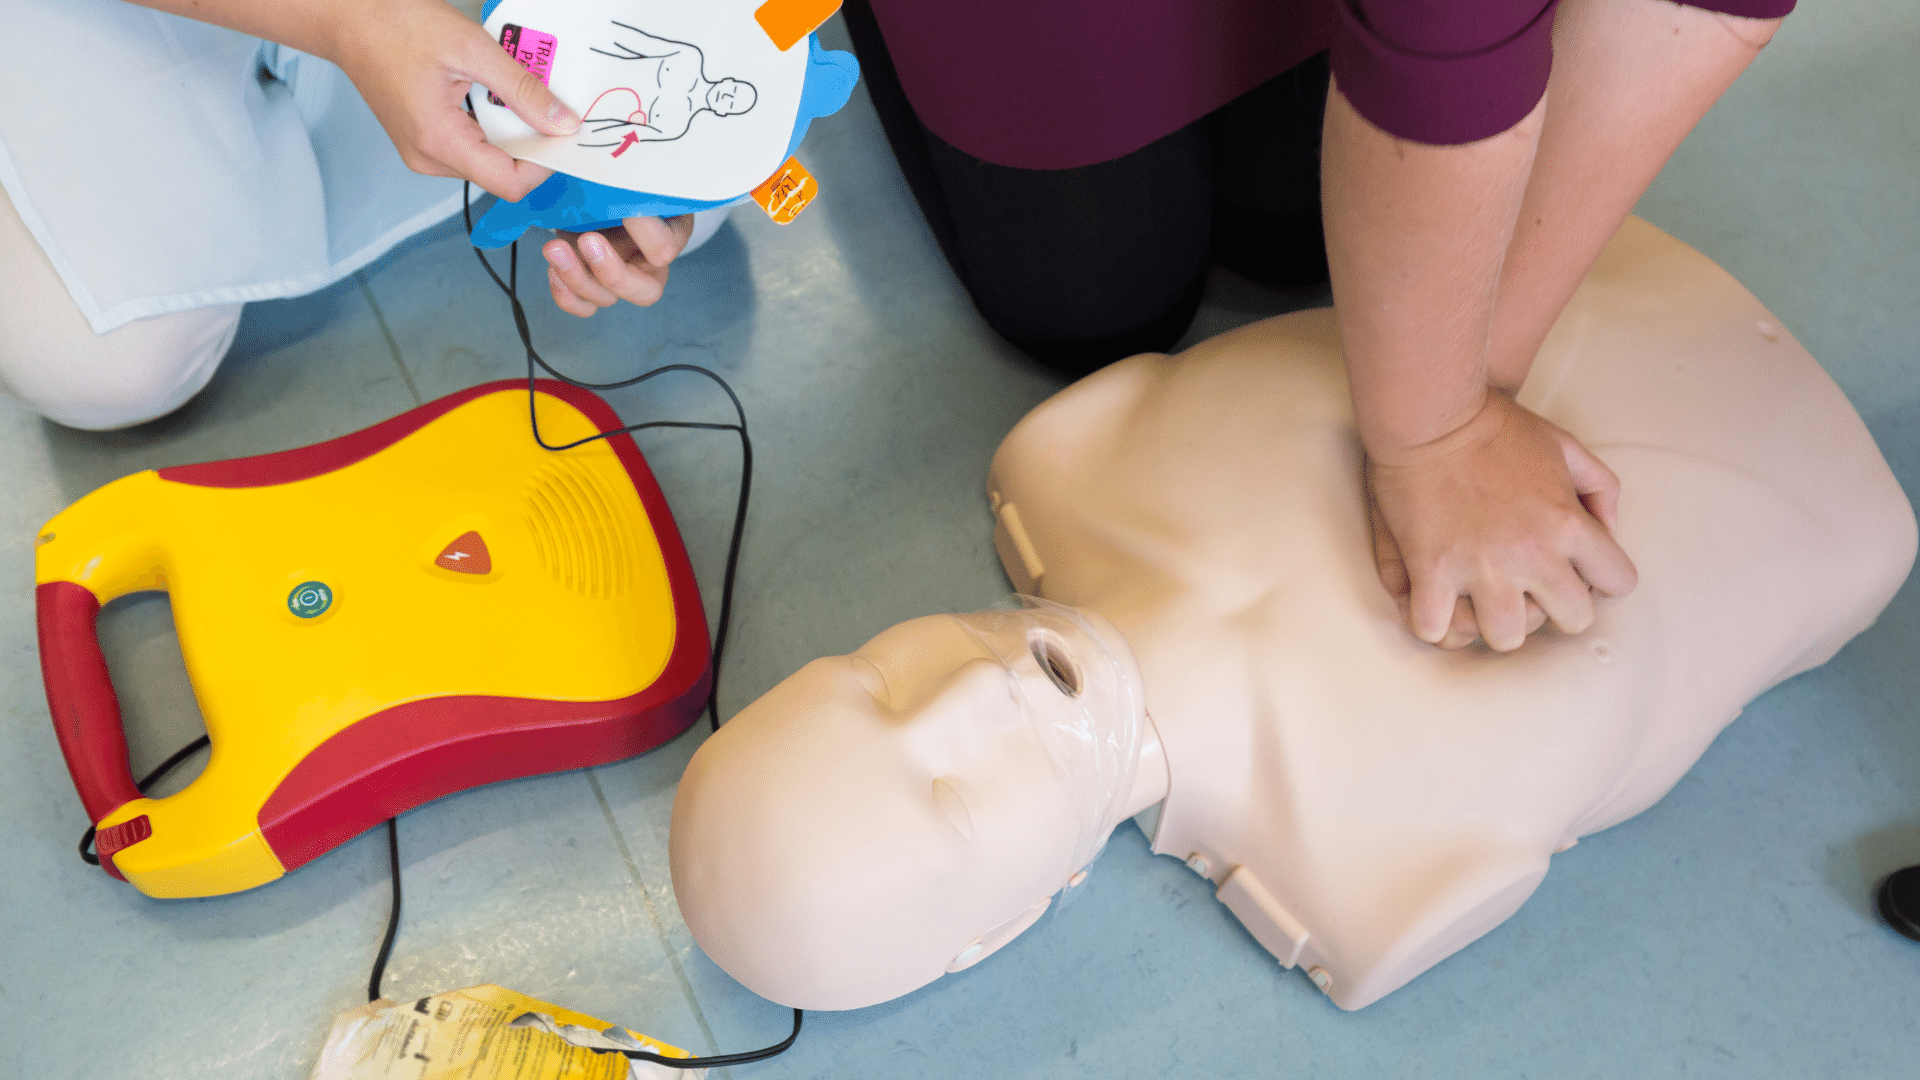 Person using AED on an adult dummy.